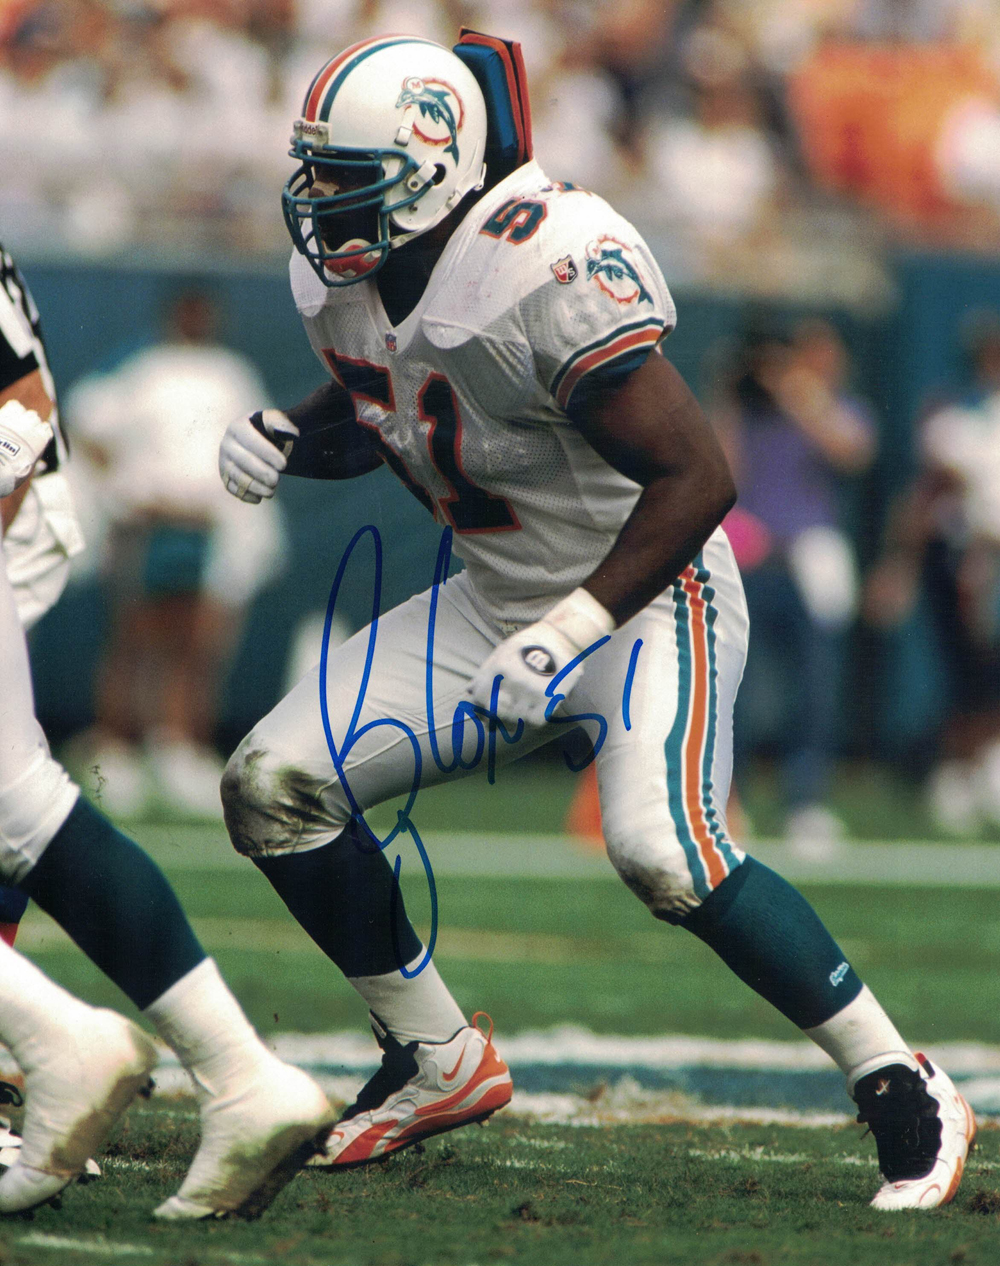 Brian Cox Autographed/Signed Miami Dolphins 8x10 Photo 30157